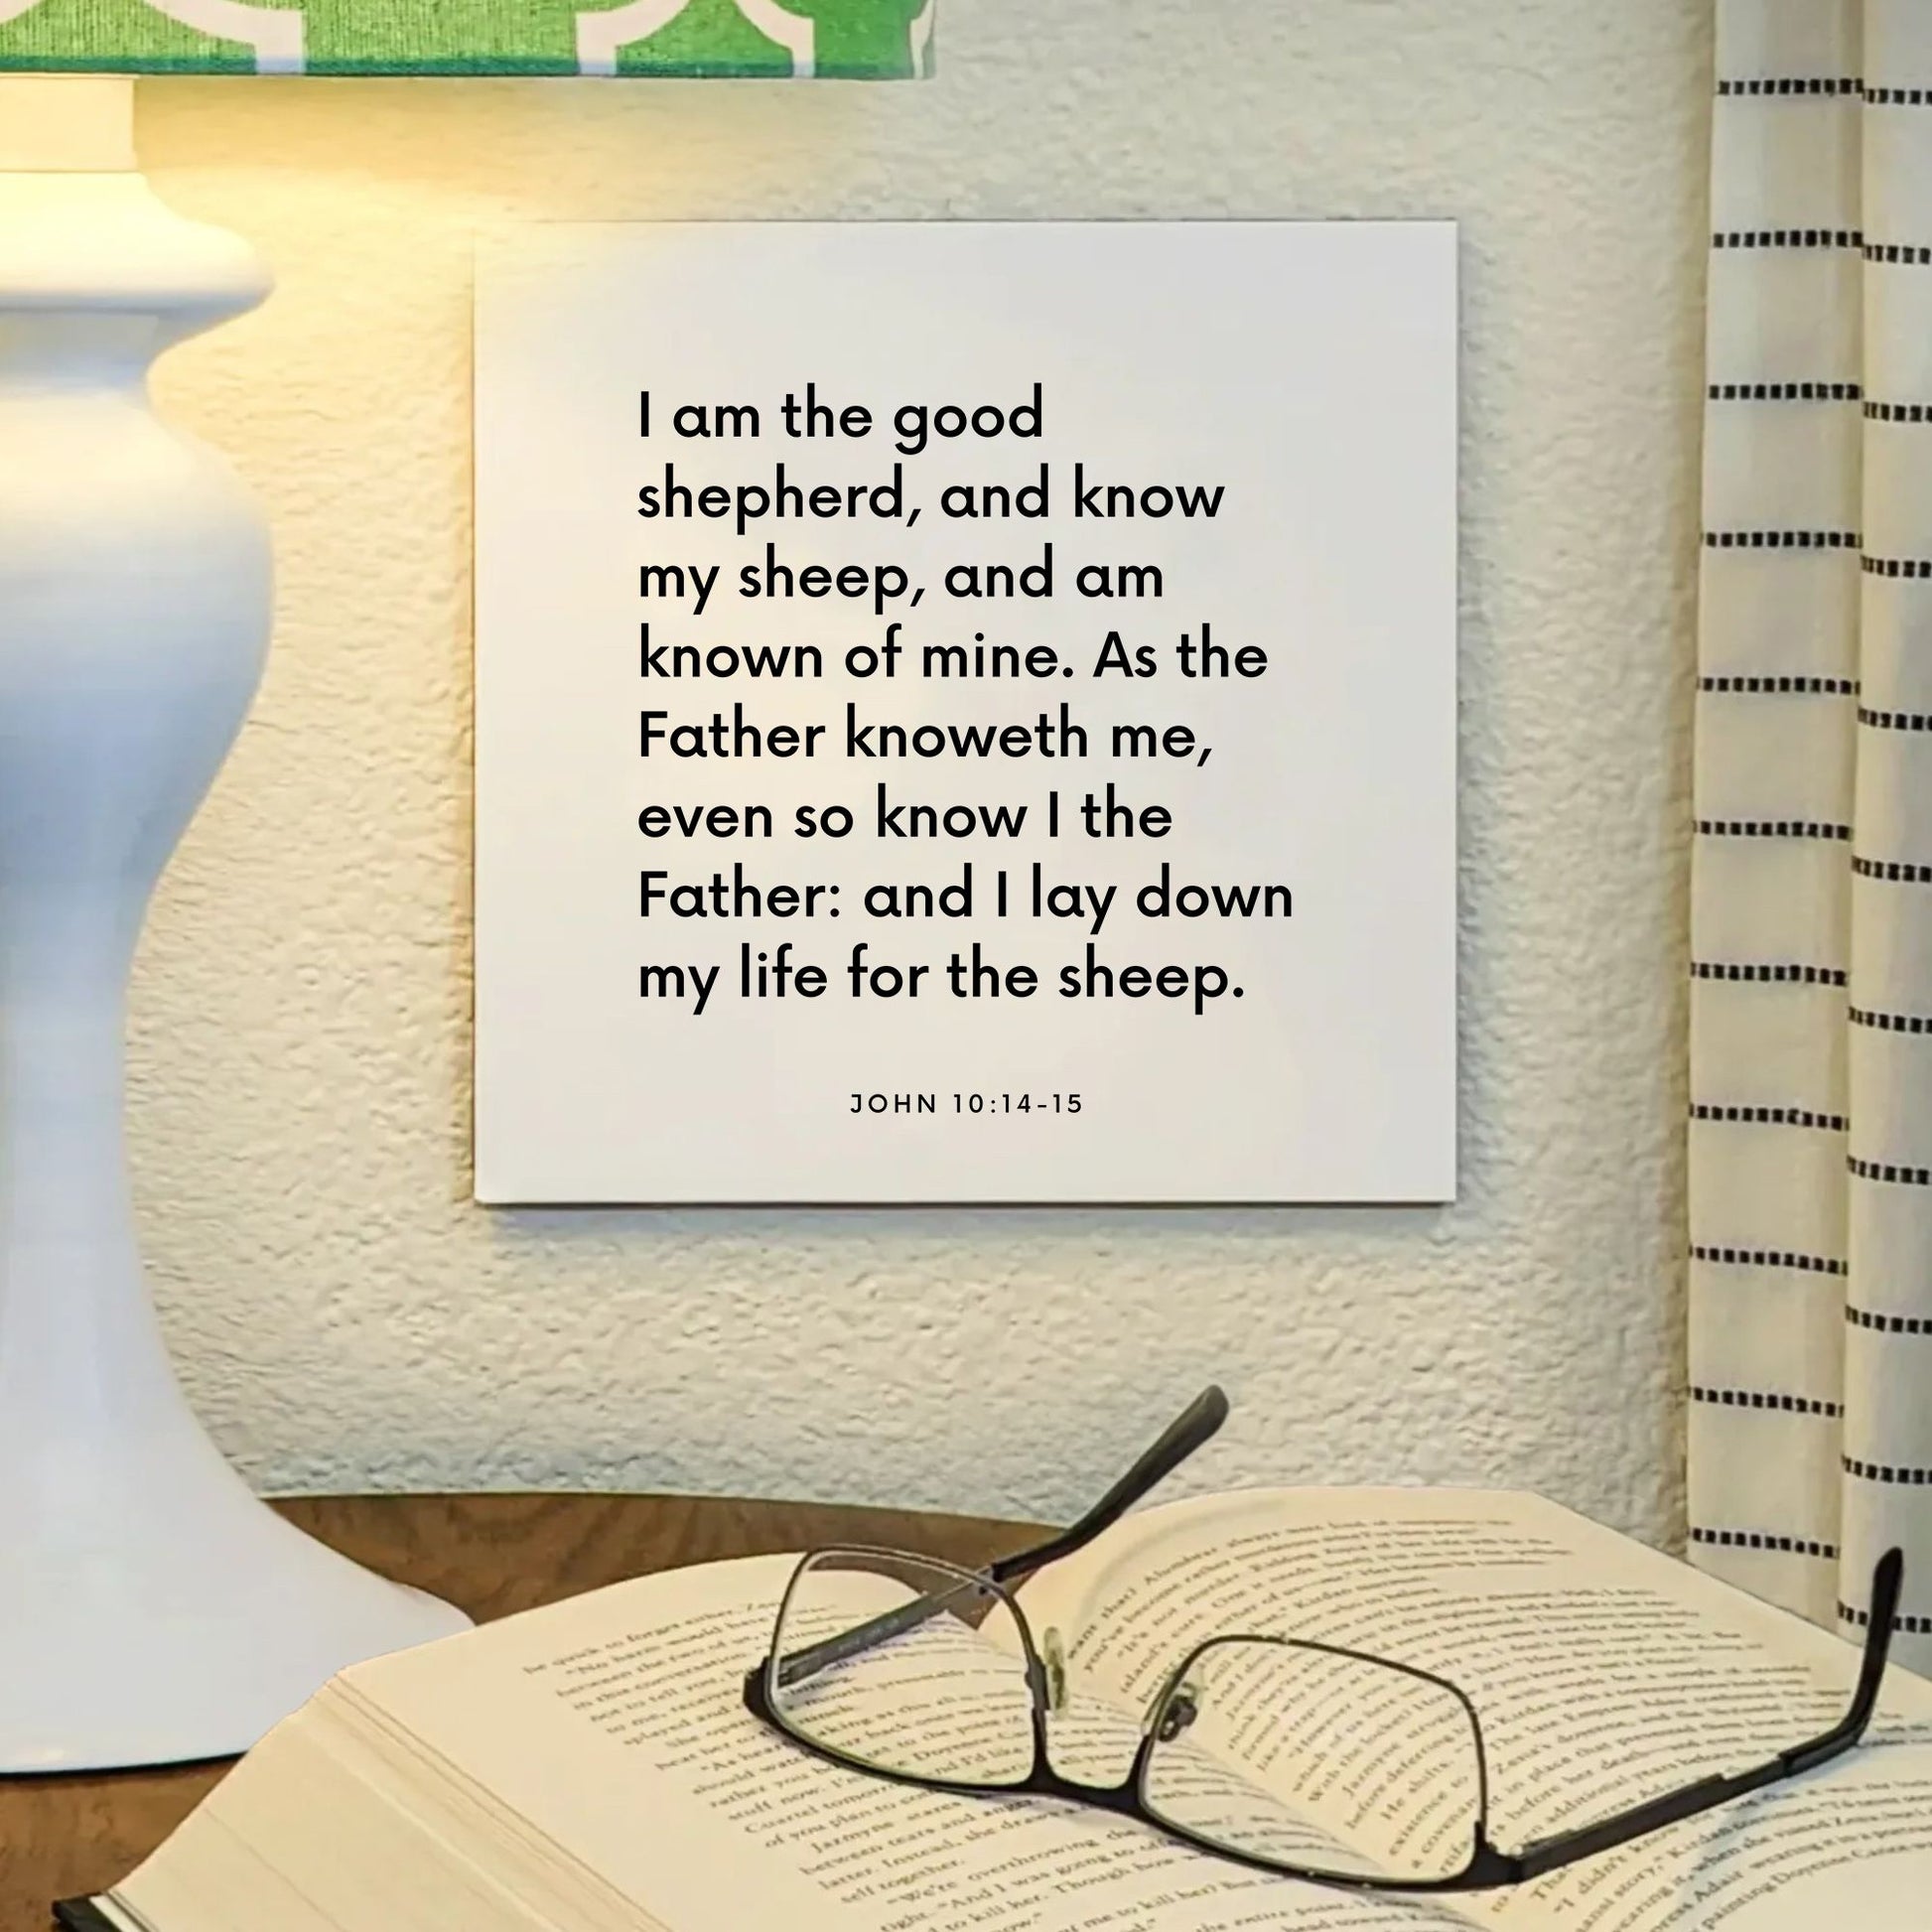 Lamp mouting of the scripture tile for John 10:14-15 - "I am the good shepherd, and know my sheep"